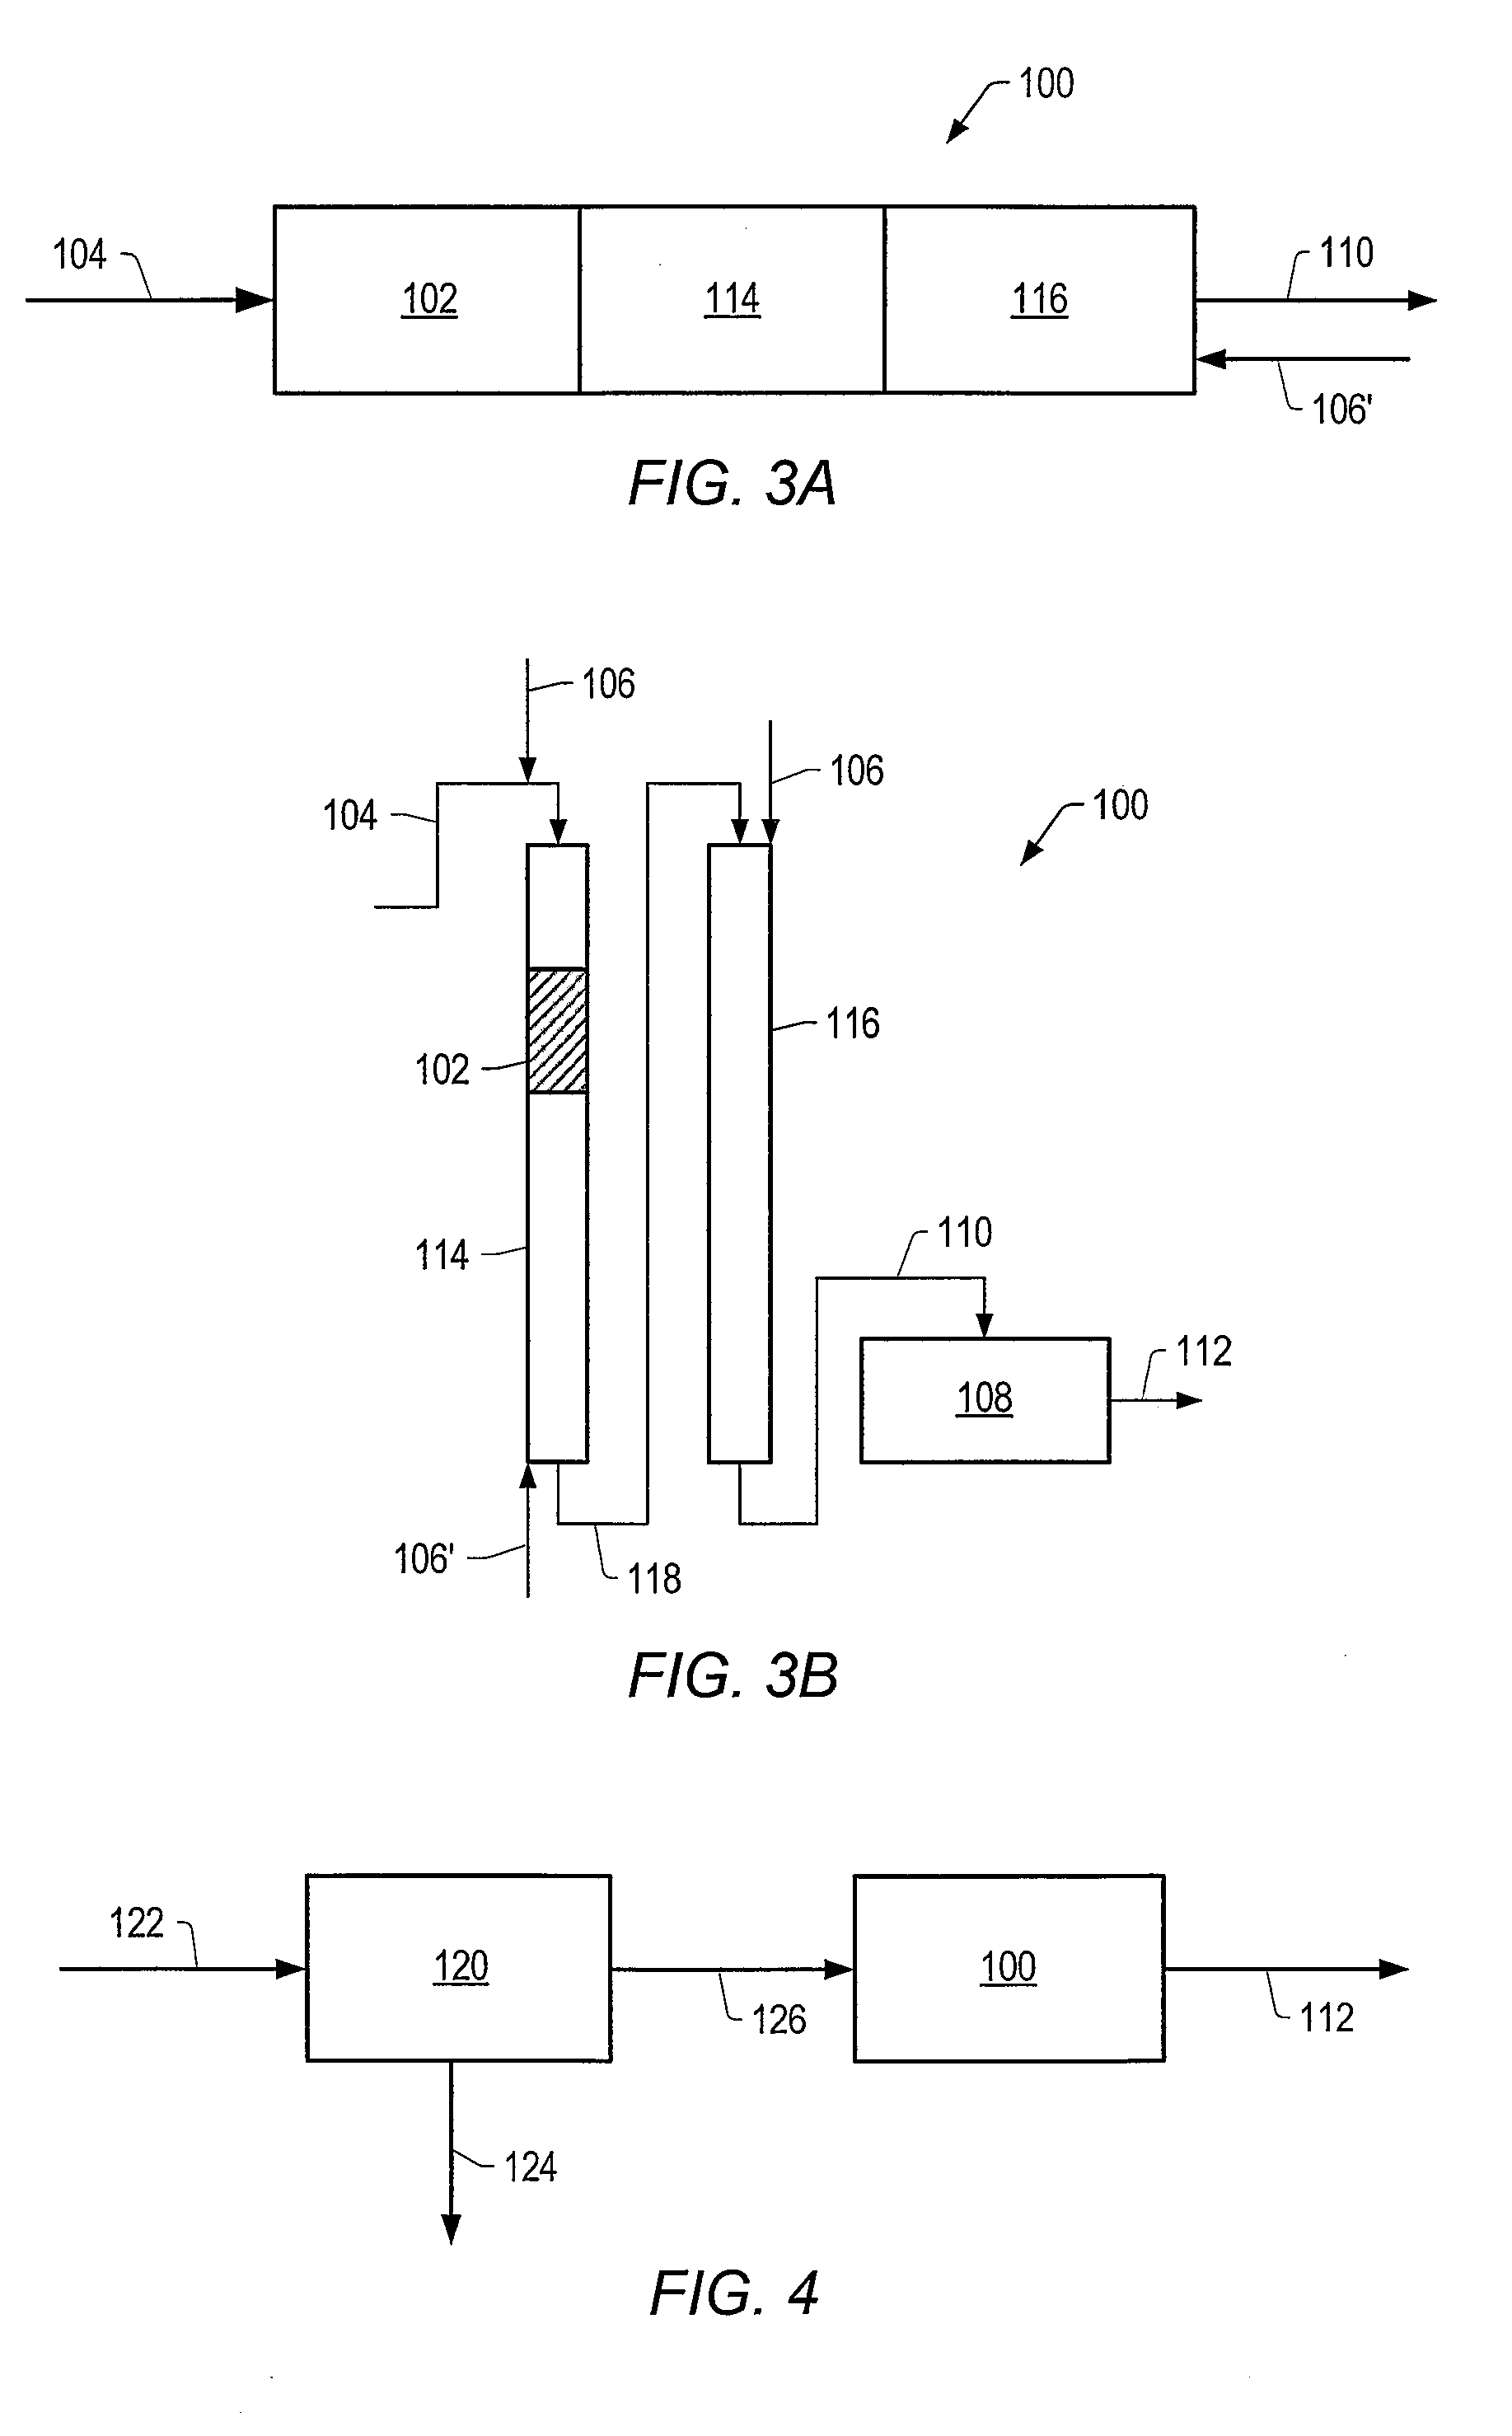 Systems for treating a hydrocarbon feed